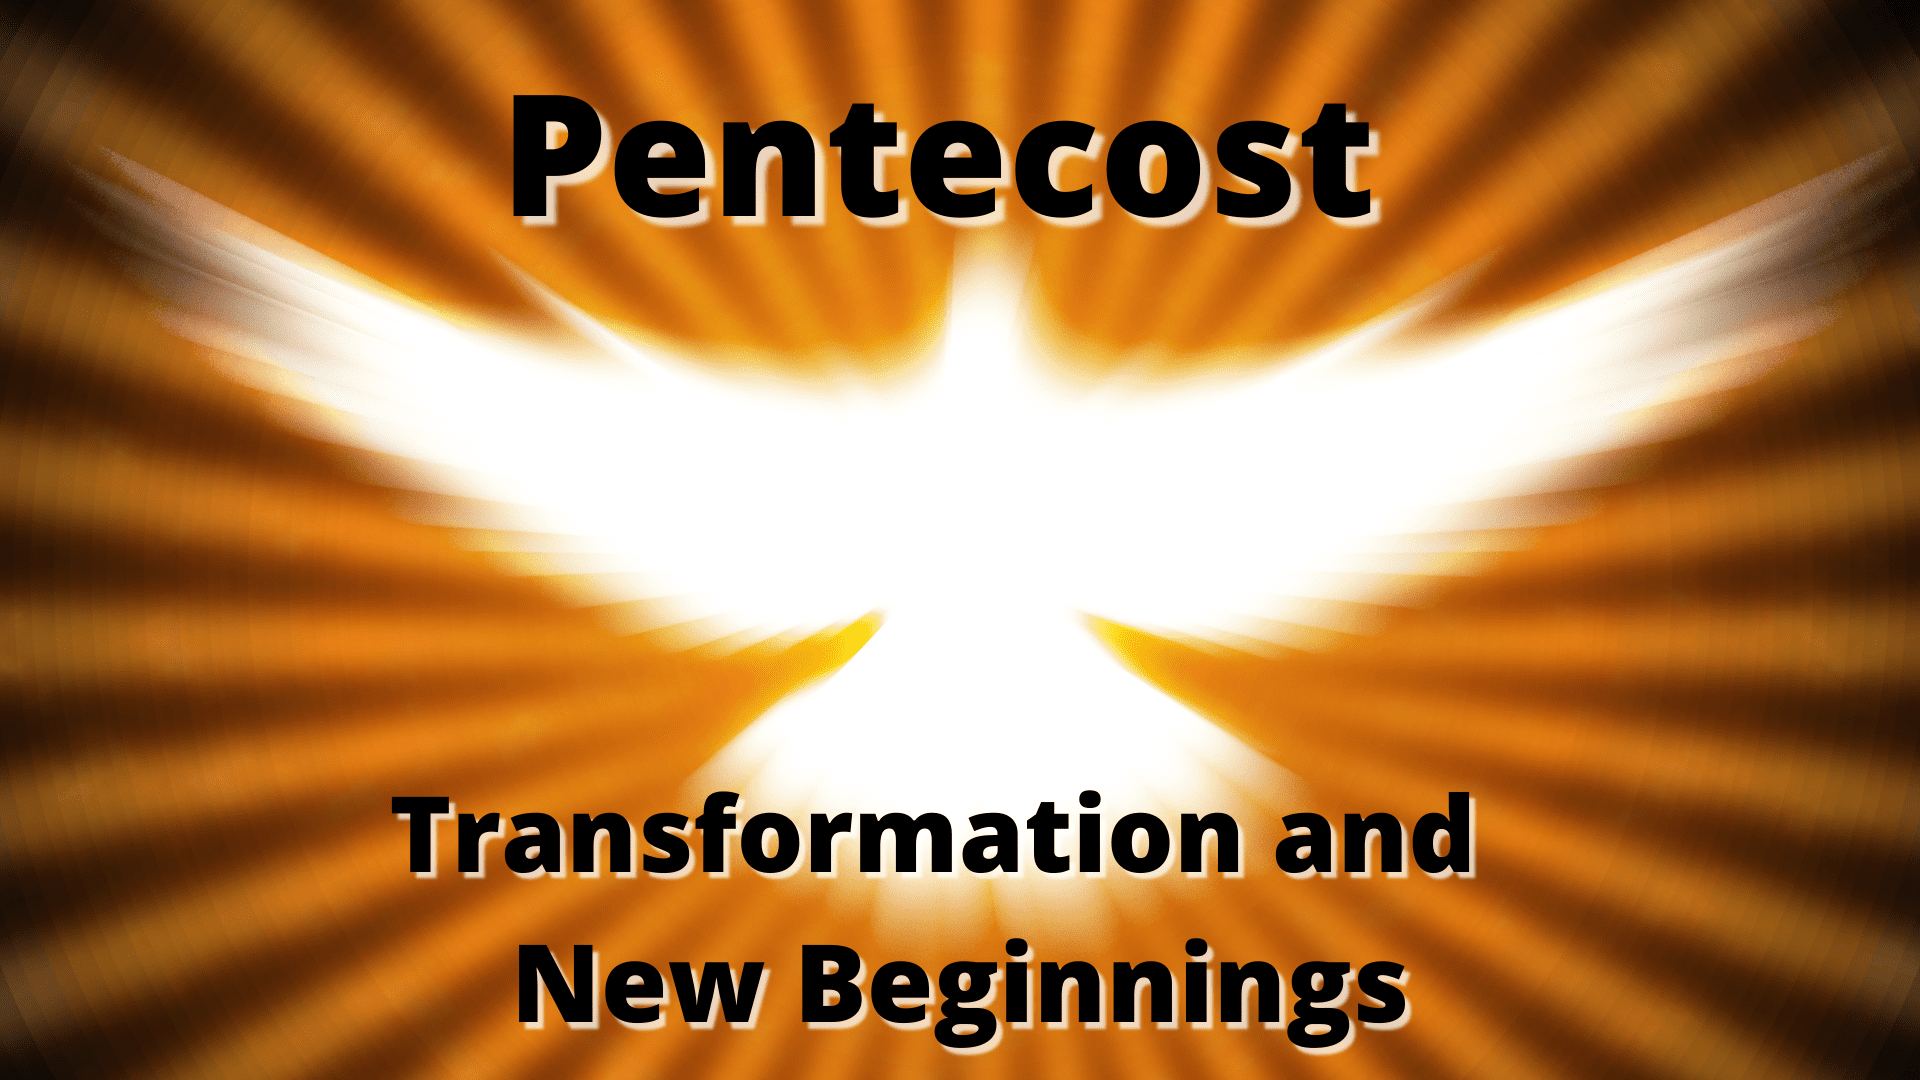 Featured image for “Pentecost: Transformation and New Beginnings”